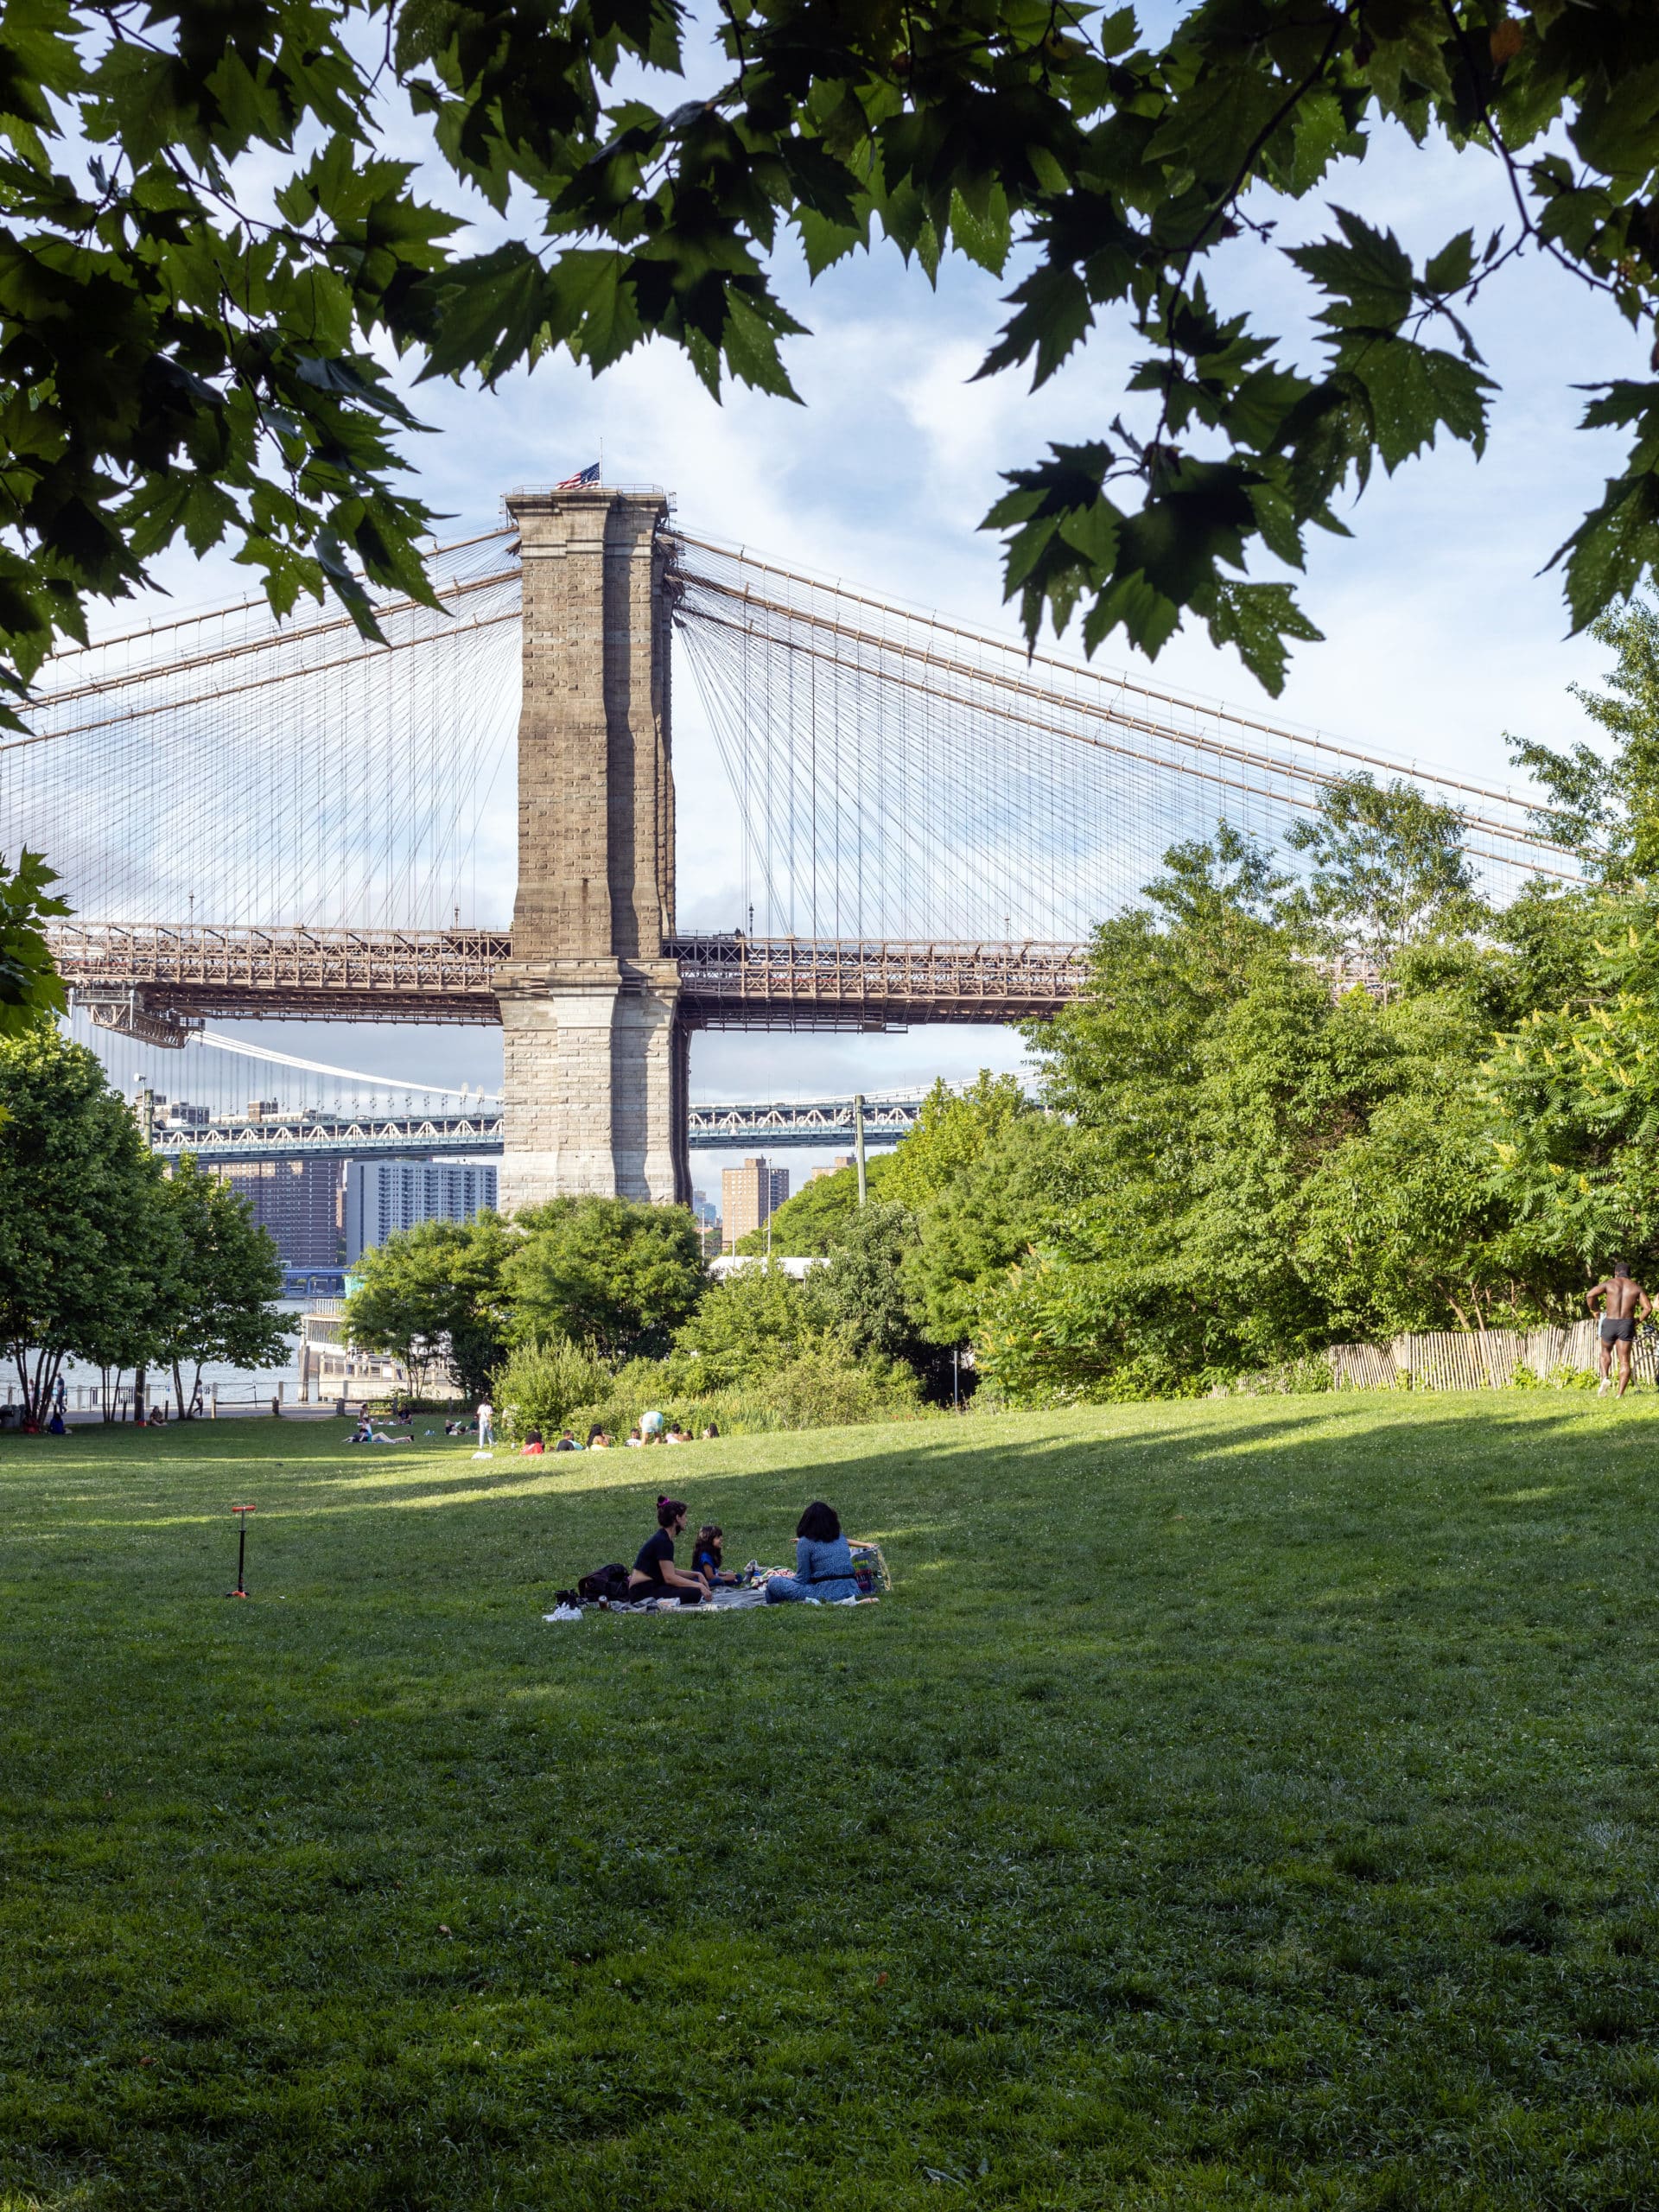 People sitting in the shade on Pier 1 Lawn with Brooklyn Bridge in background.